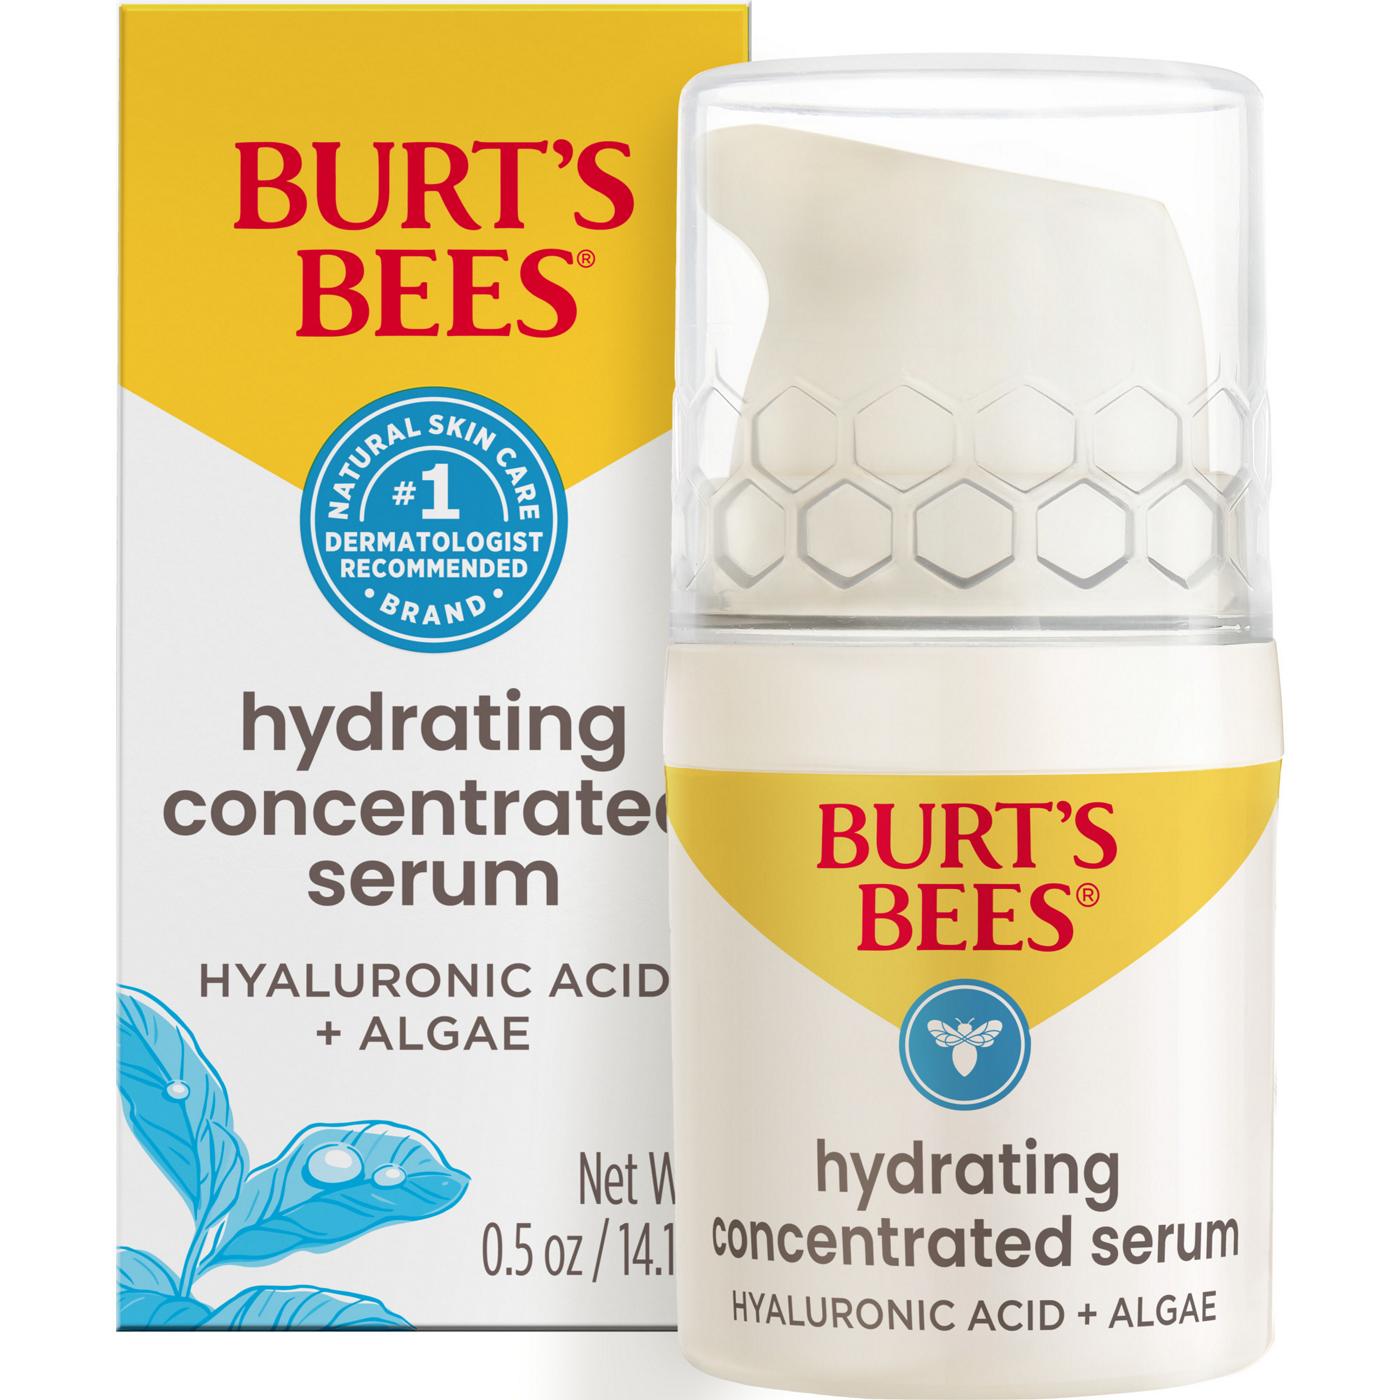 Burt's Bees Concentrated Hydrating Facial Serum - Hyaluronic Acid + Algae; image 3 of 7